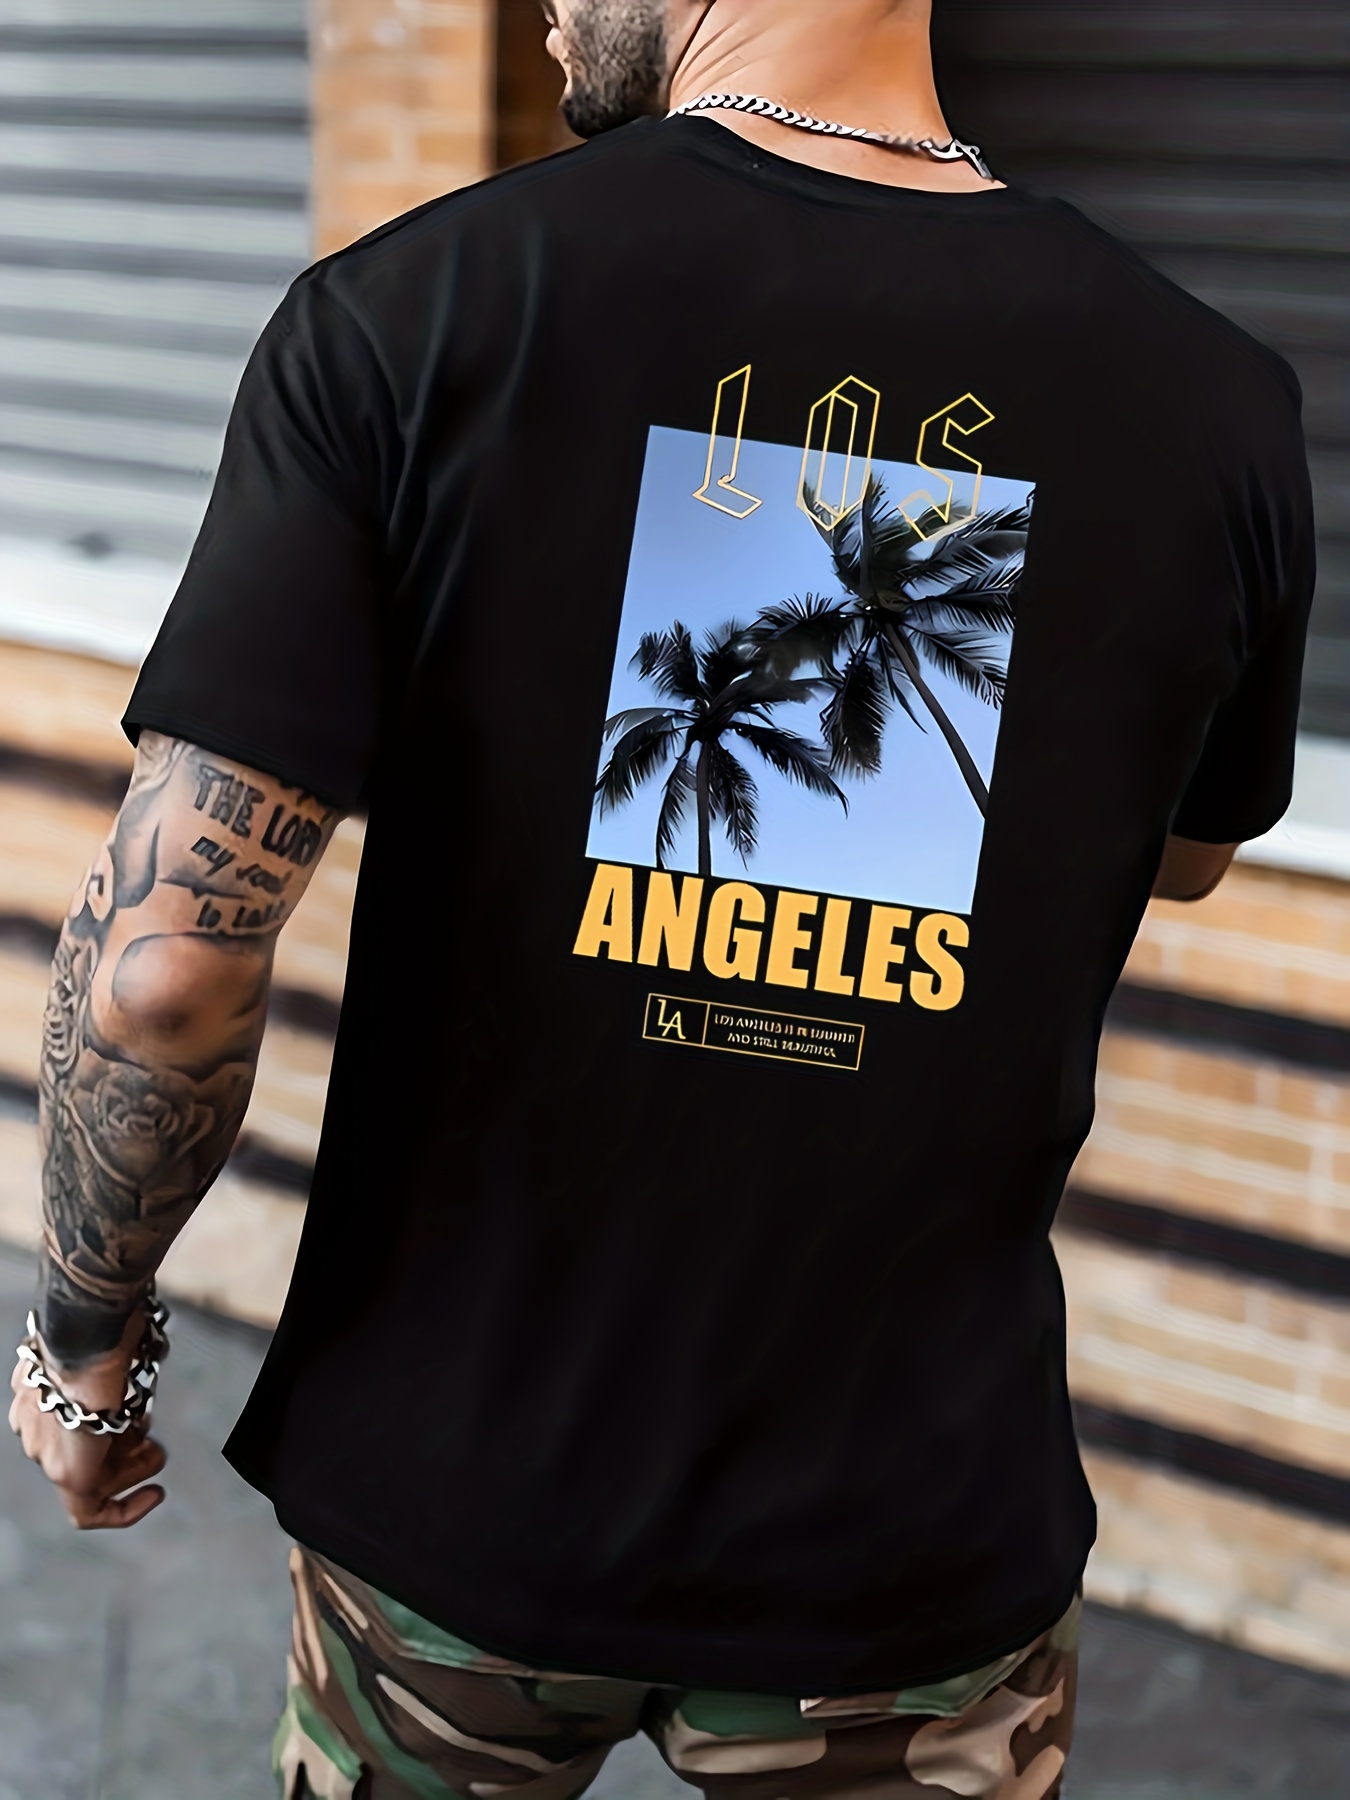 Palm Angels T-shirt with logo, Men's Clothing